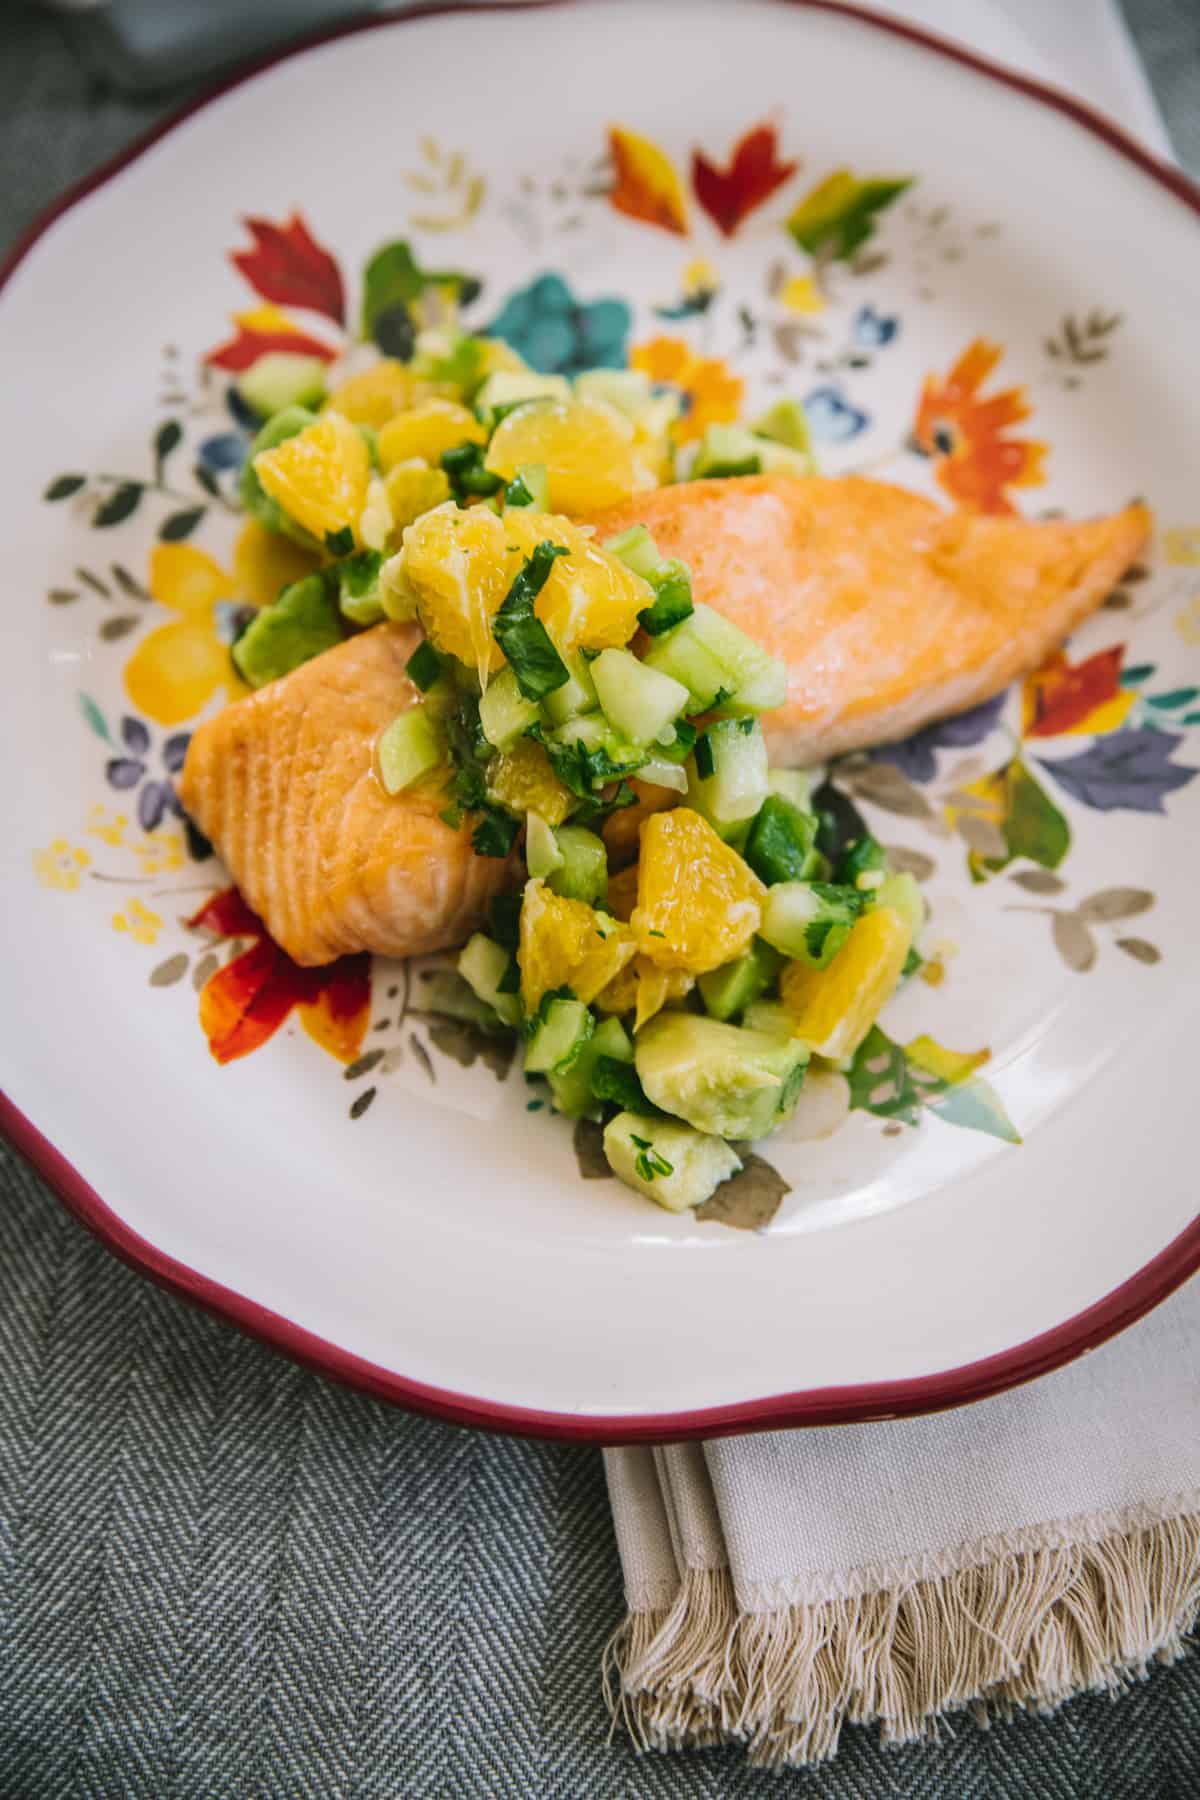 oven baked salmon topped with citrus avocado salsa on a white plate with red edges and a floral pattern.